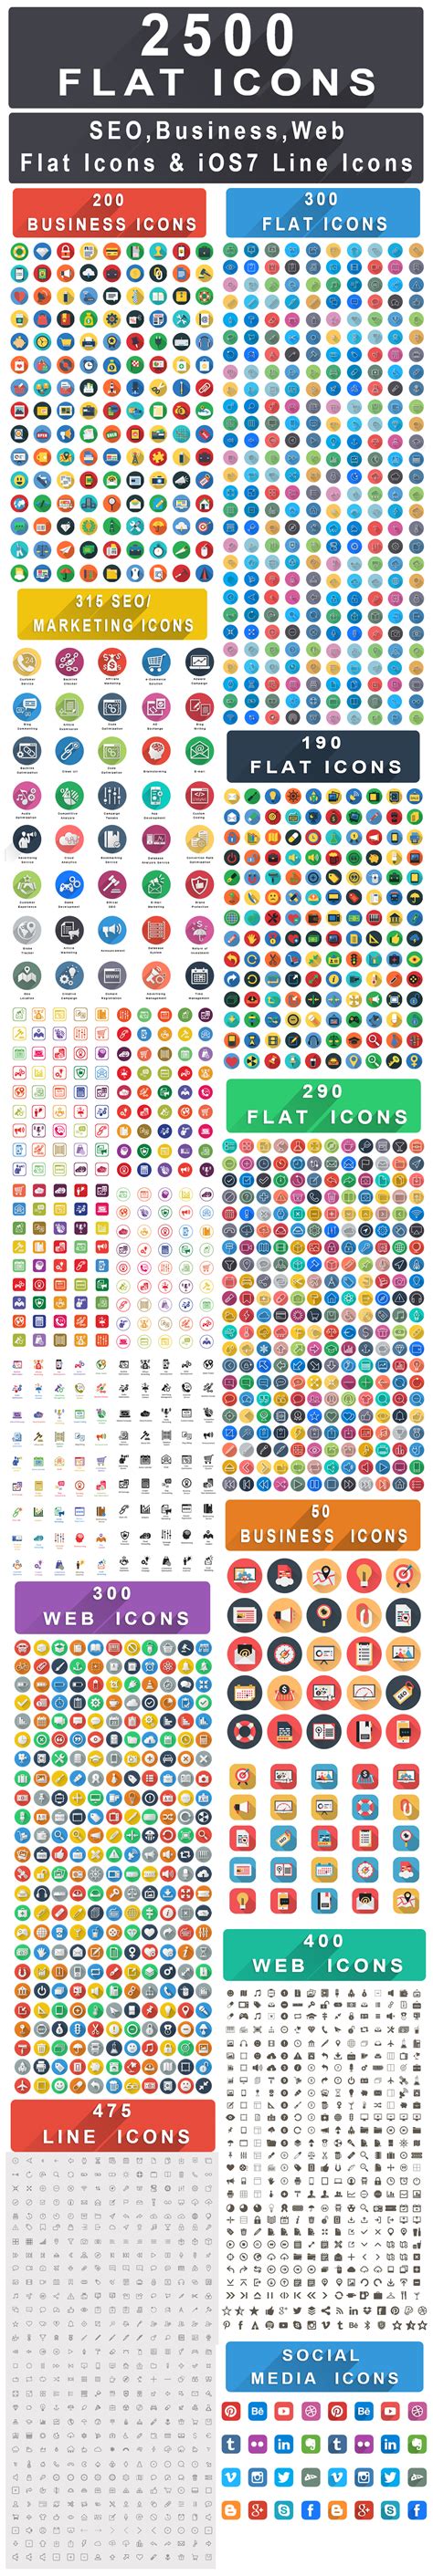 2500 Flat Icons Bundle Web Seo Business Icons By